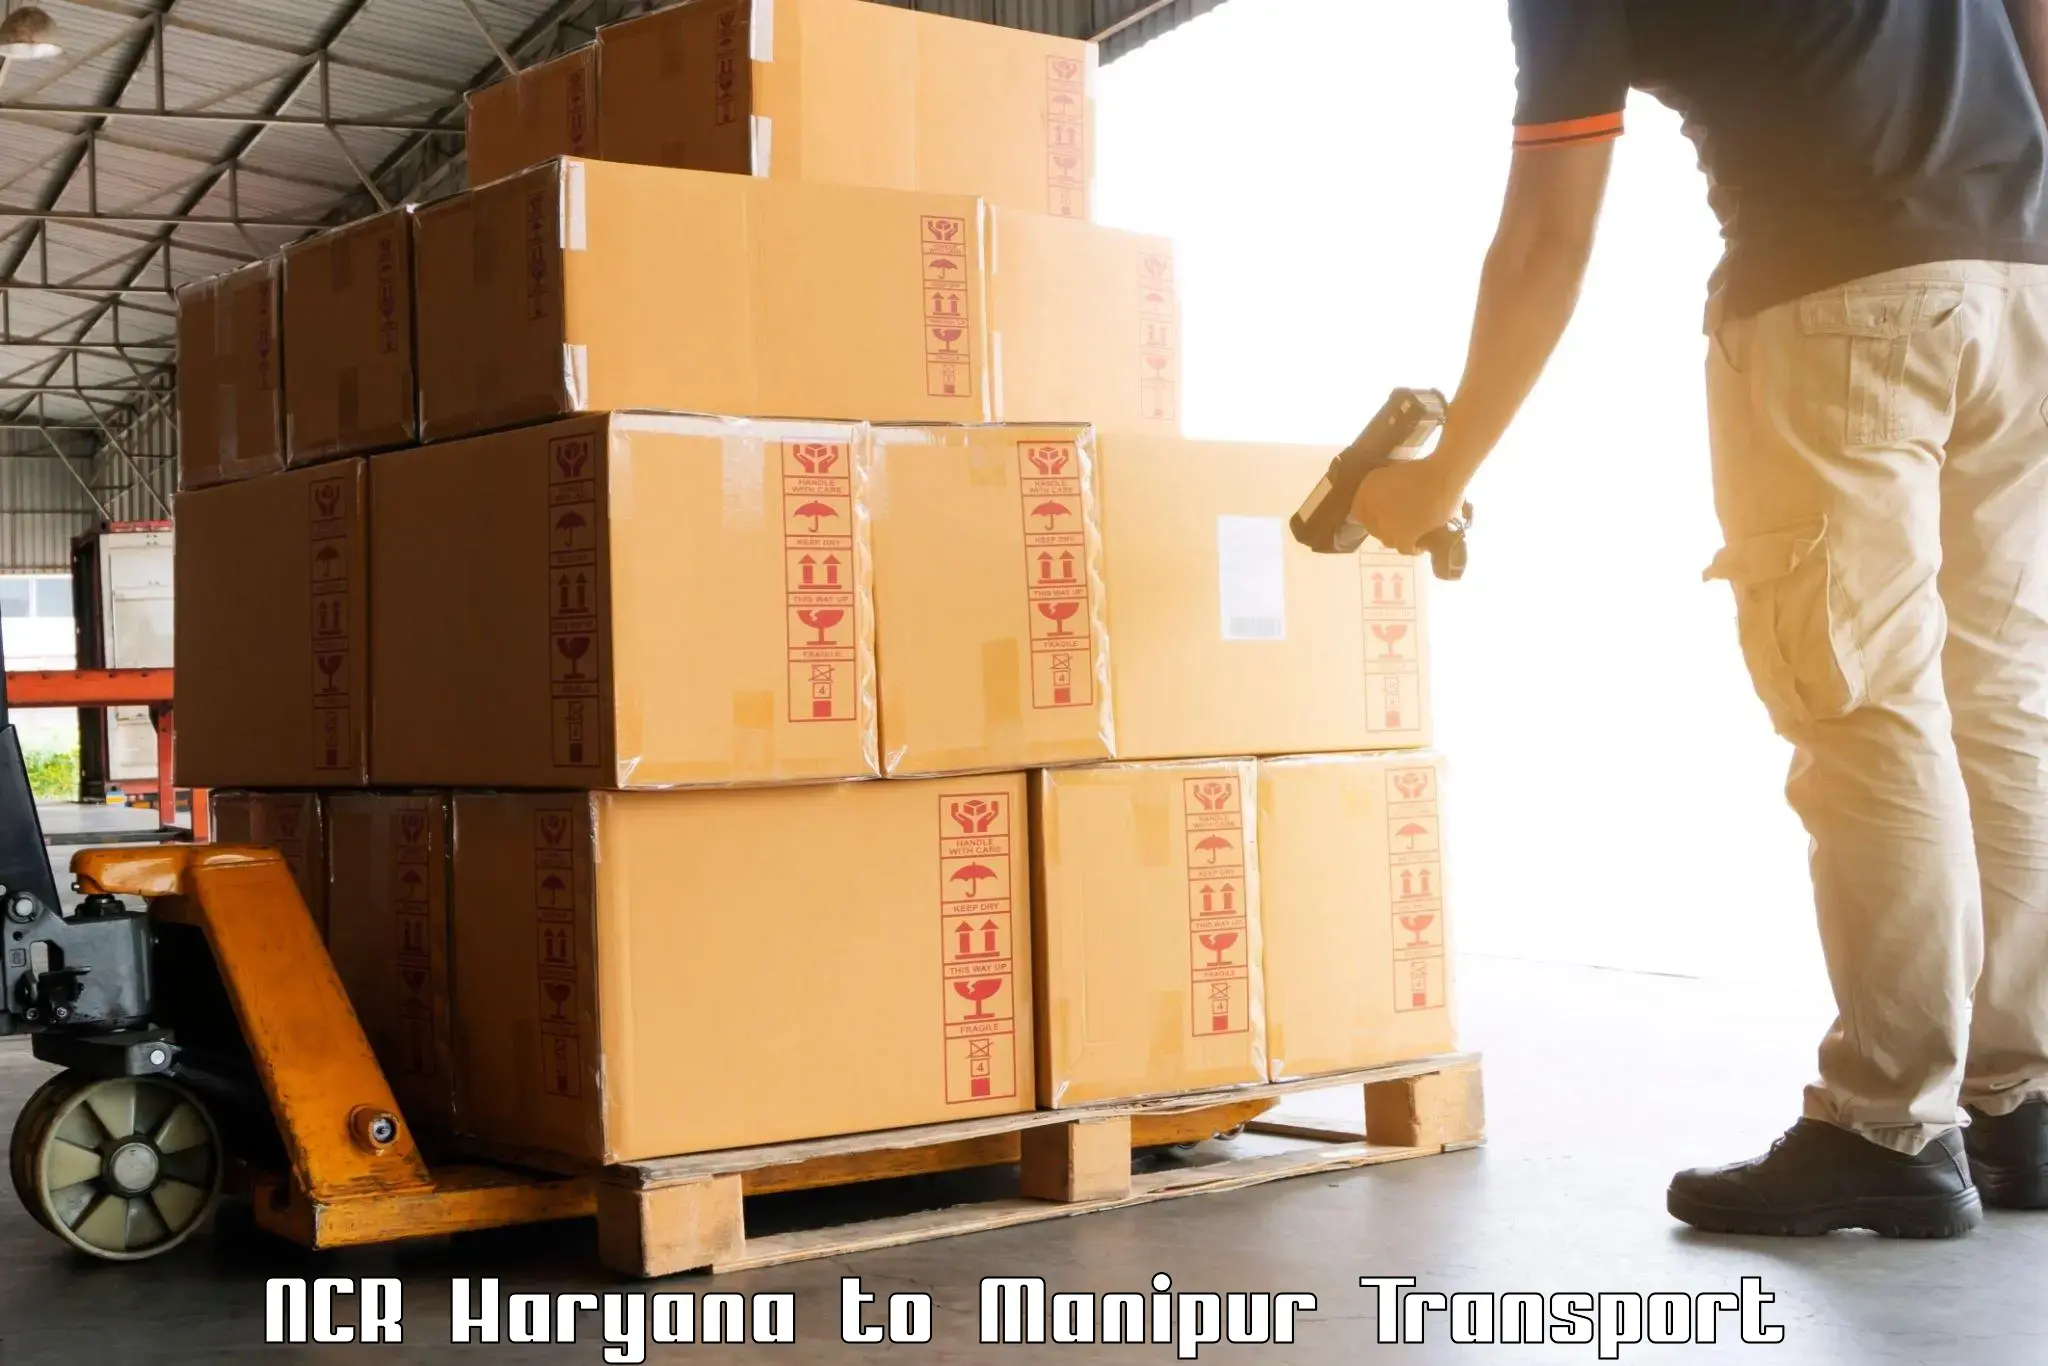 Vehicle transport services NCR Haryana to Manipur